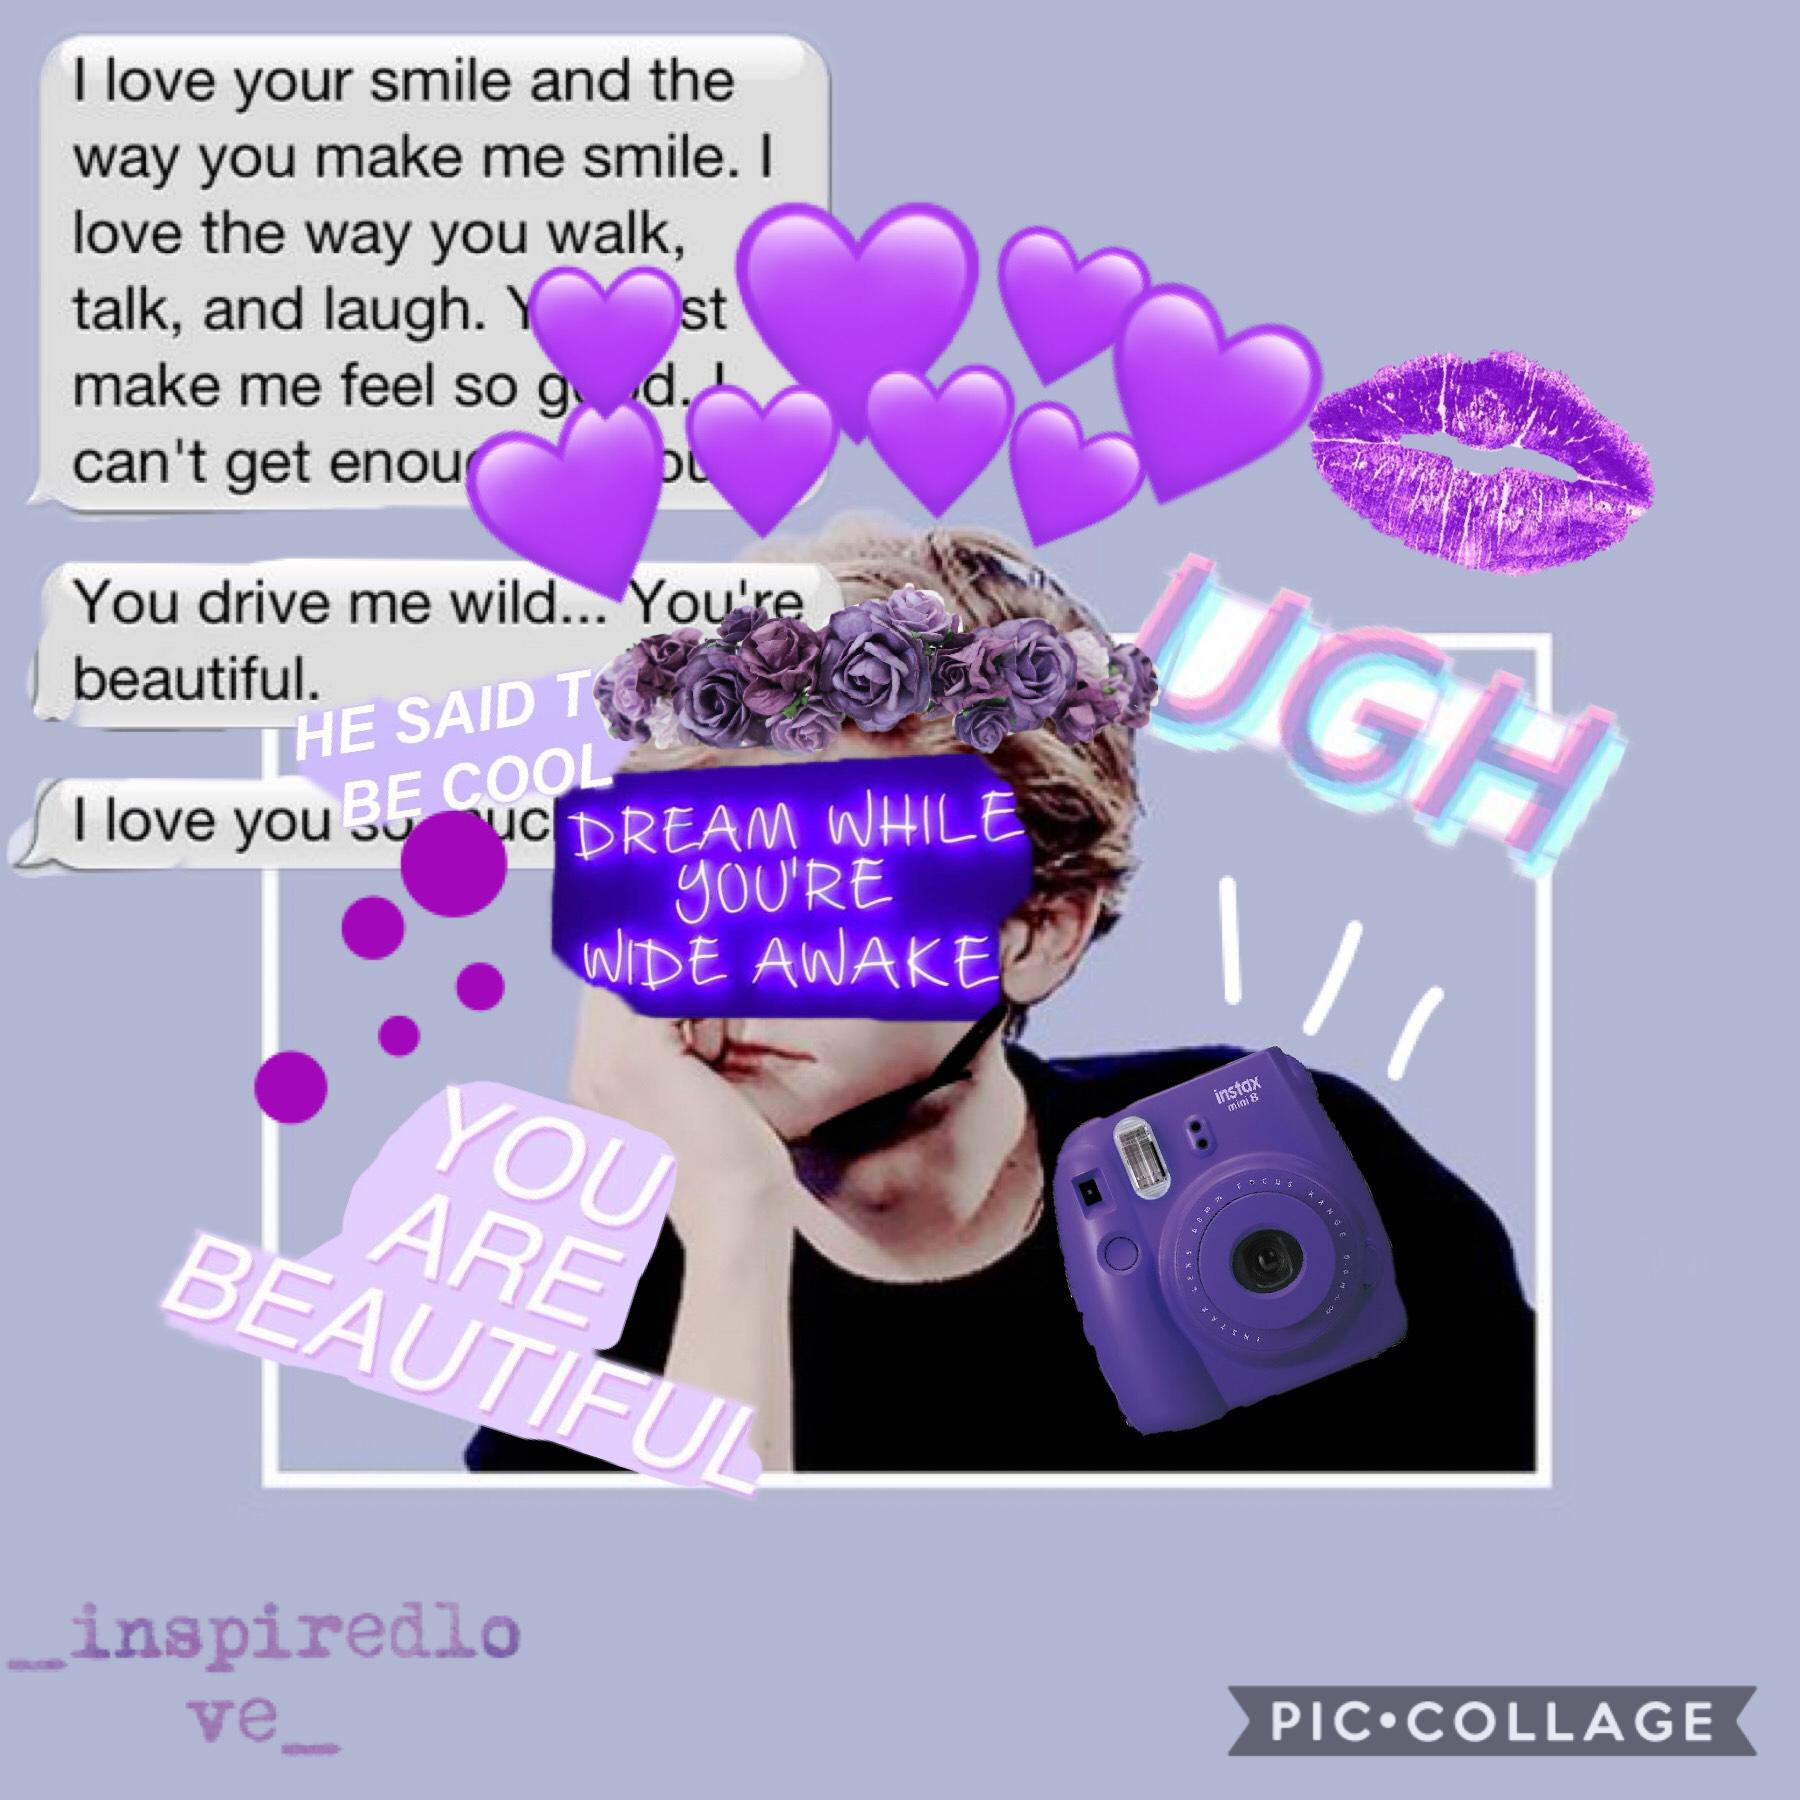 this is probably really bad but oh well. the picture i used is a picture of one of my favorite actors, Thomas Brodie-Sangster. he’s sooo cute and amazing and ughh. but anyways, have a good day/night💖